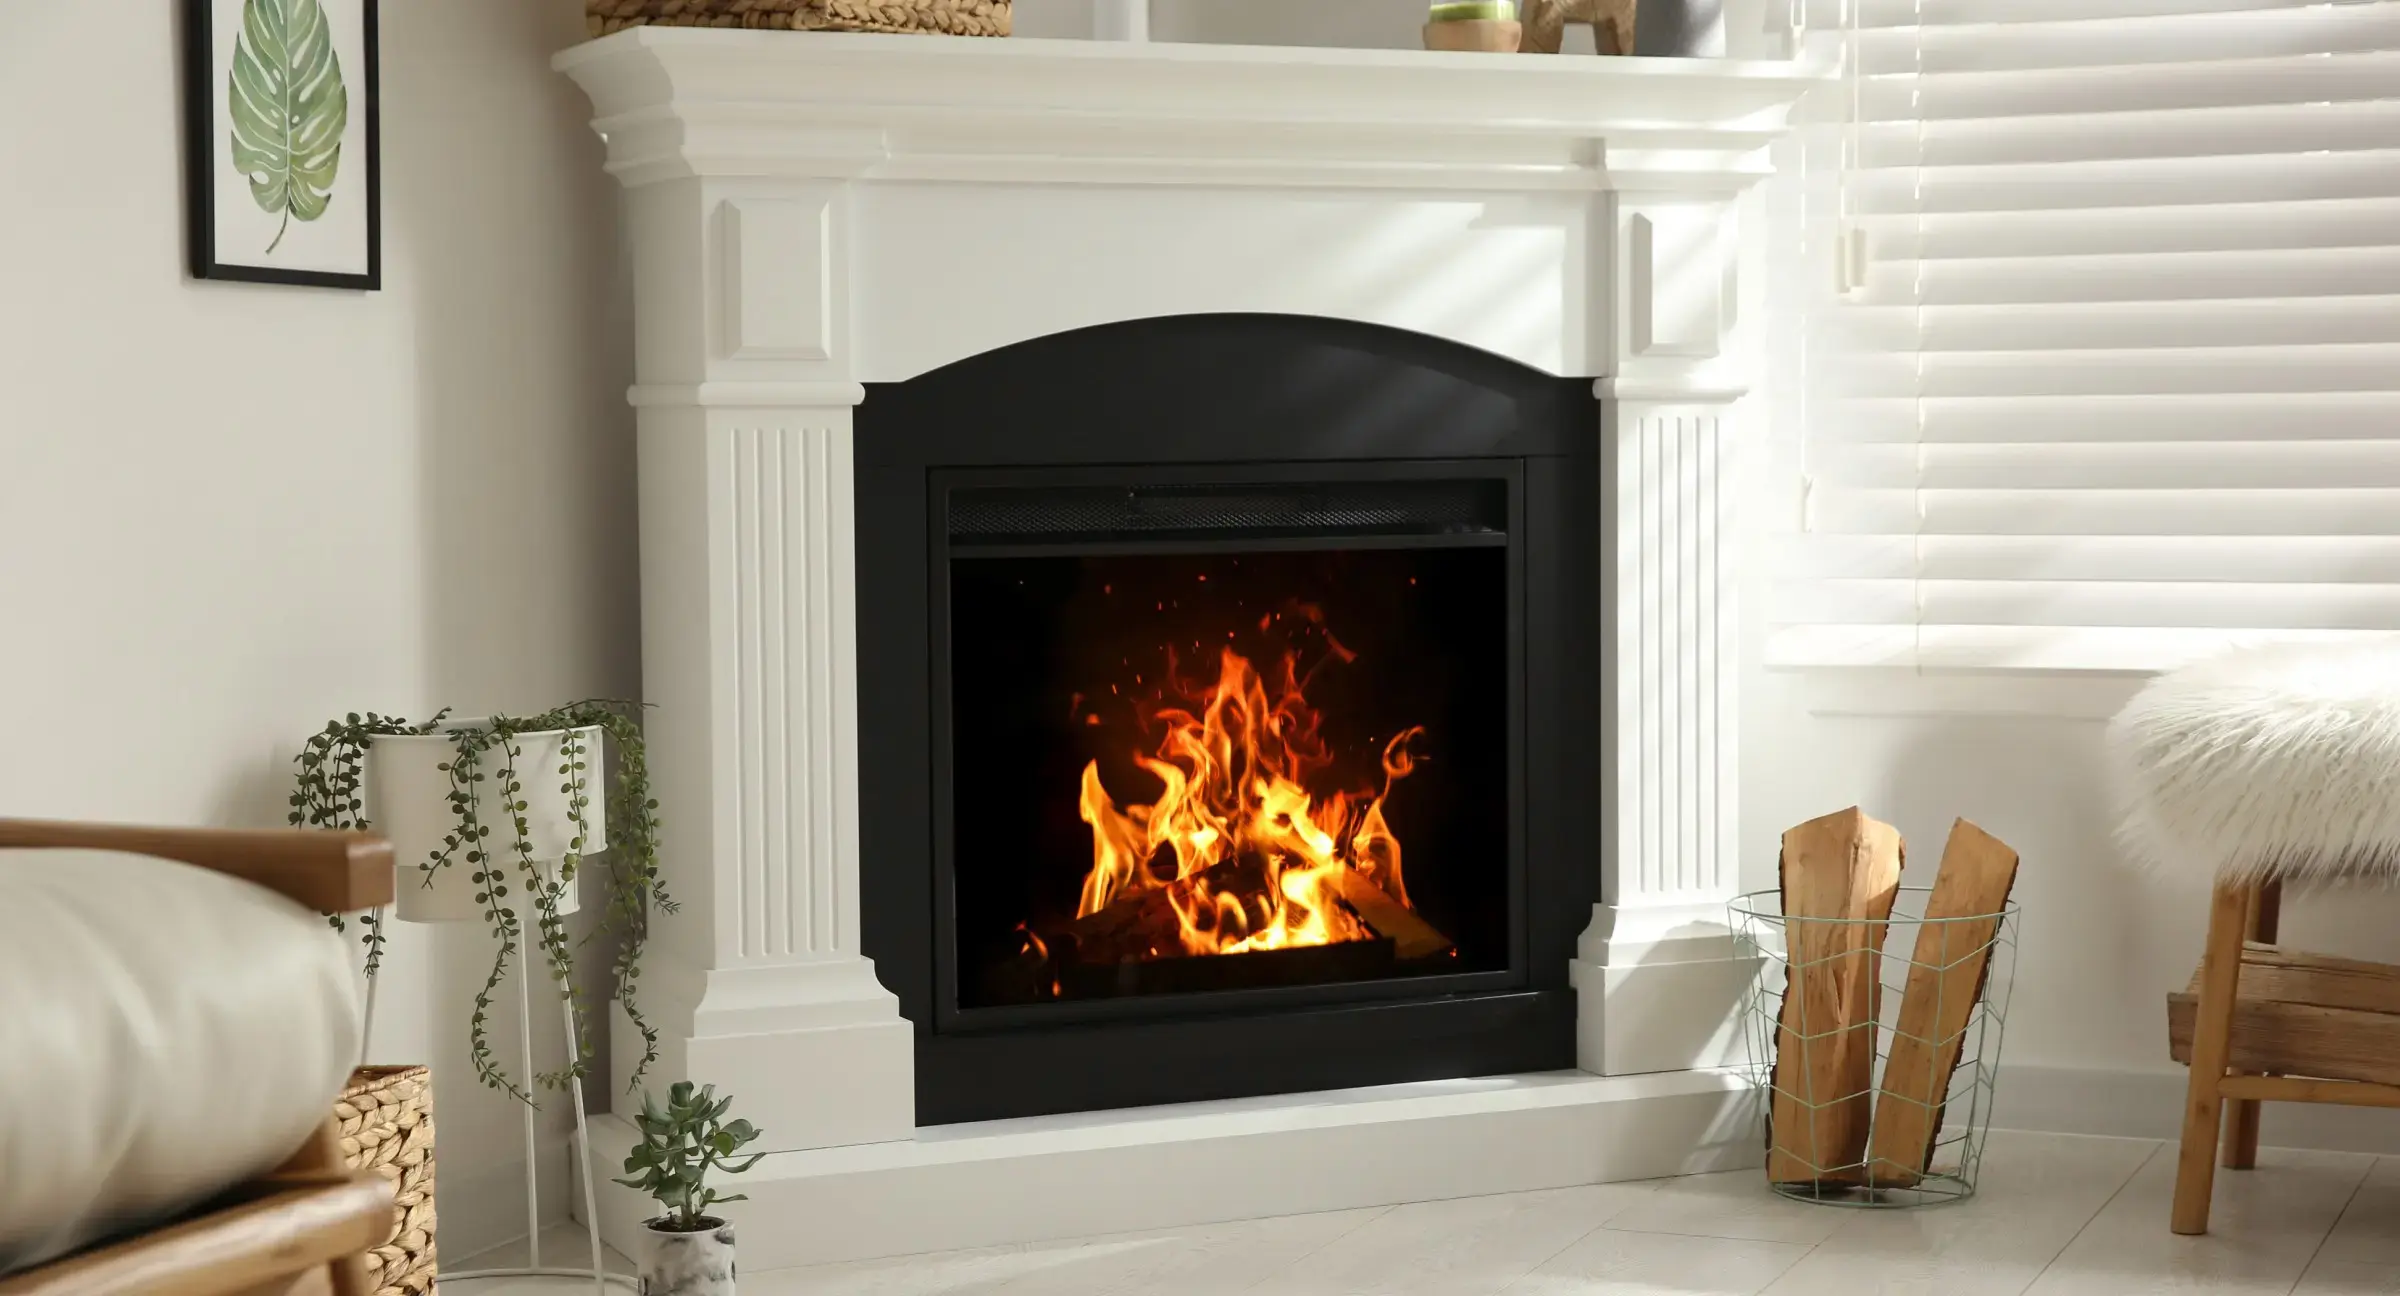 Important Tips for Buying a Fireplace: What You Should Consider